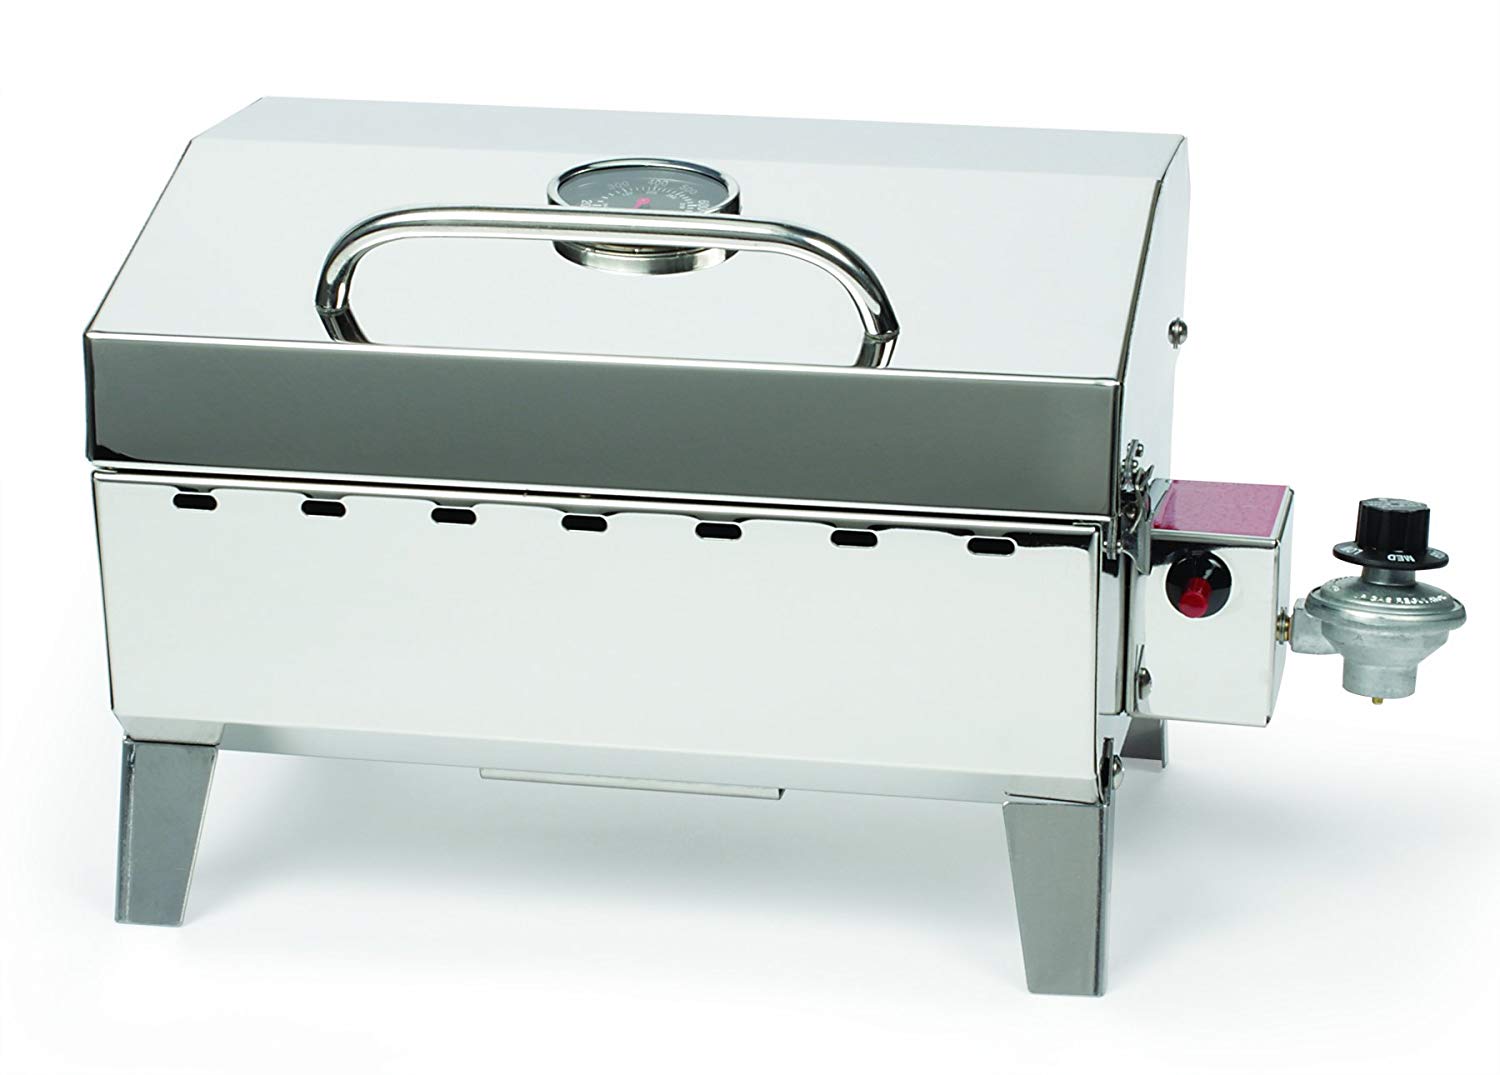 Barbecue Grille - Buy Electric, Charcoal and Propane Grills At Best Prices